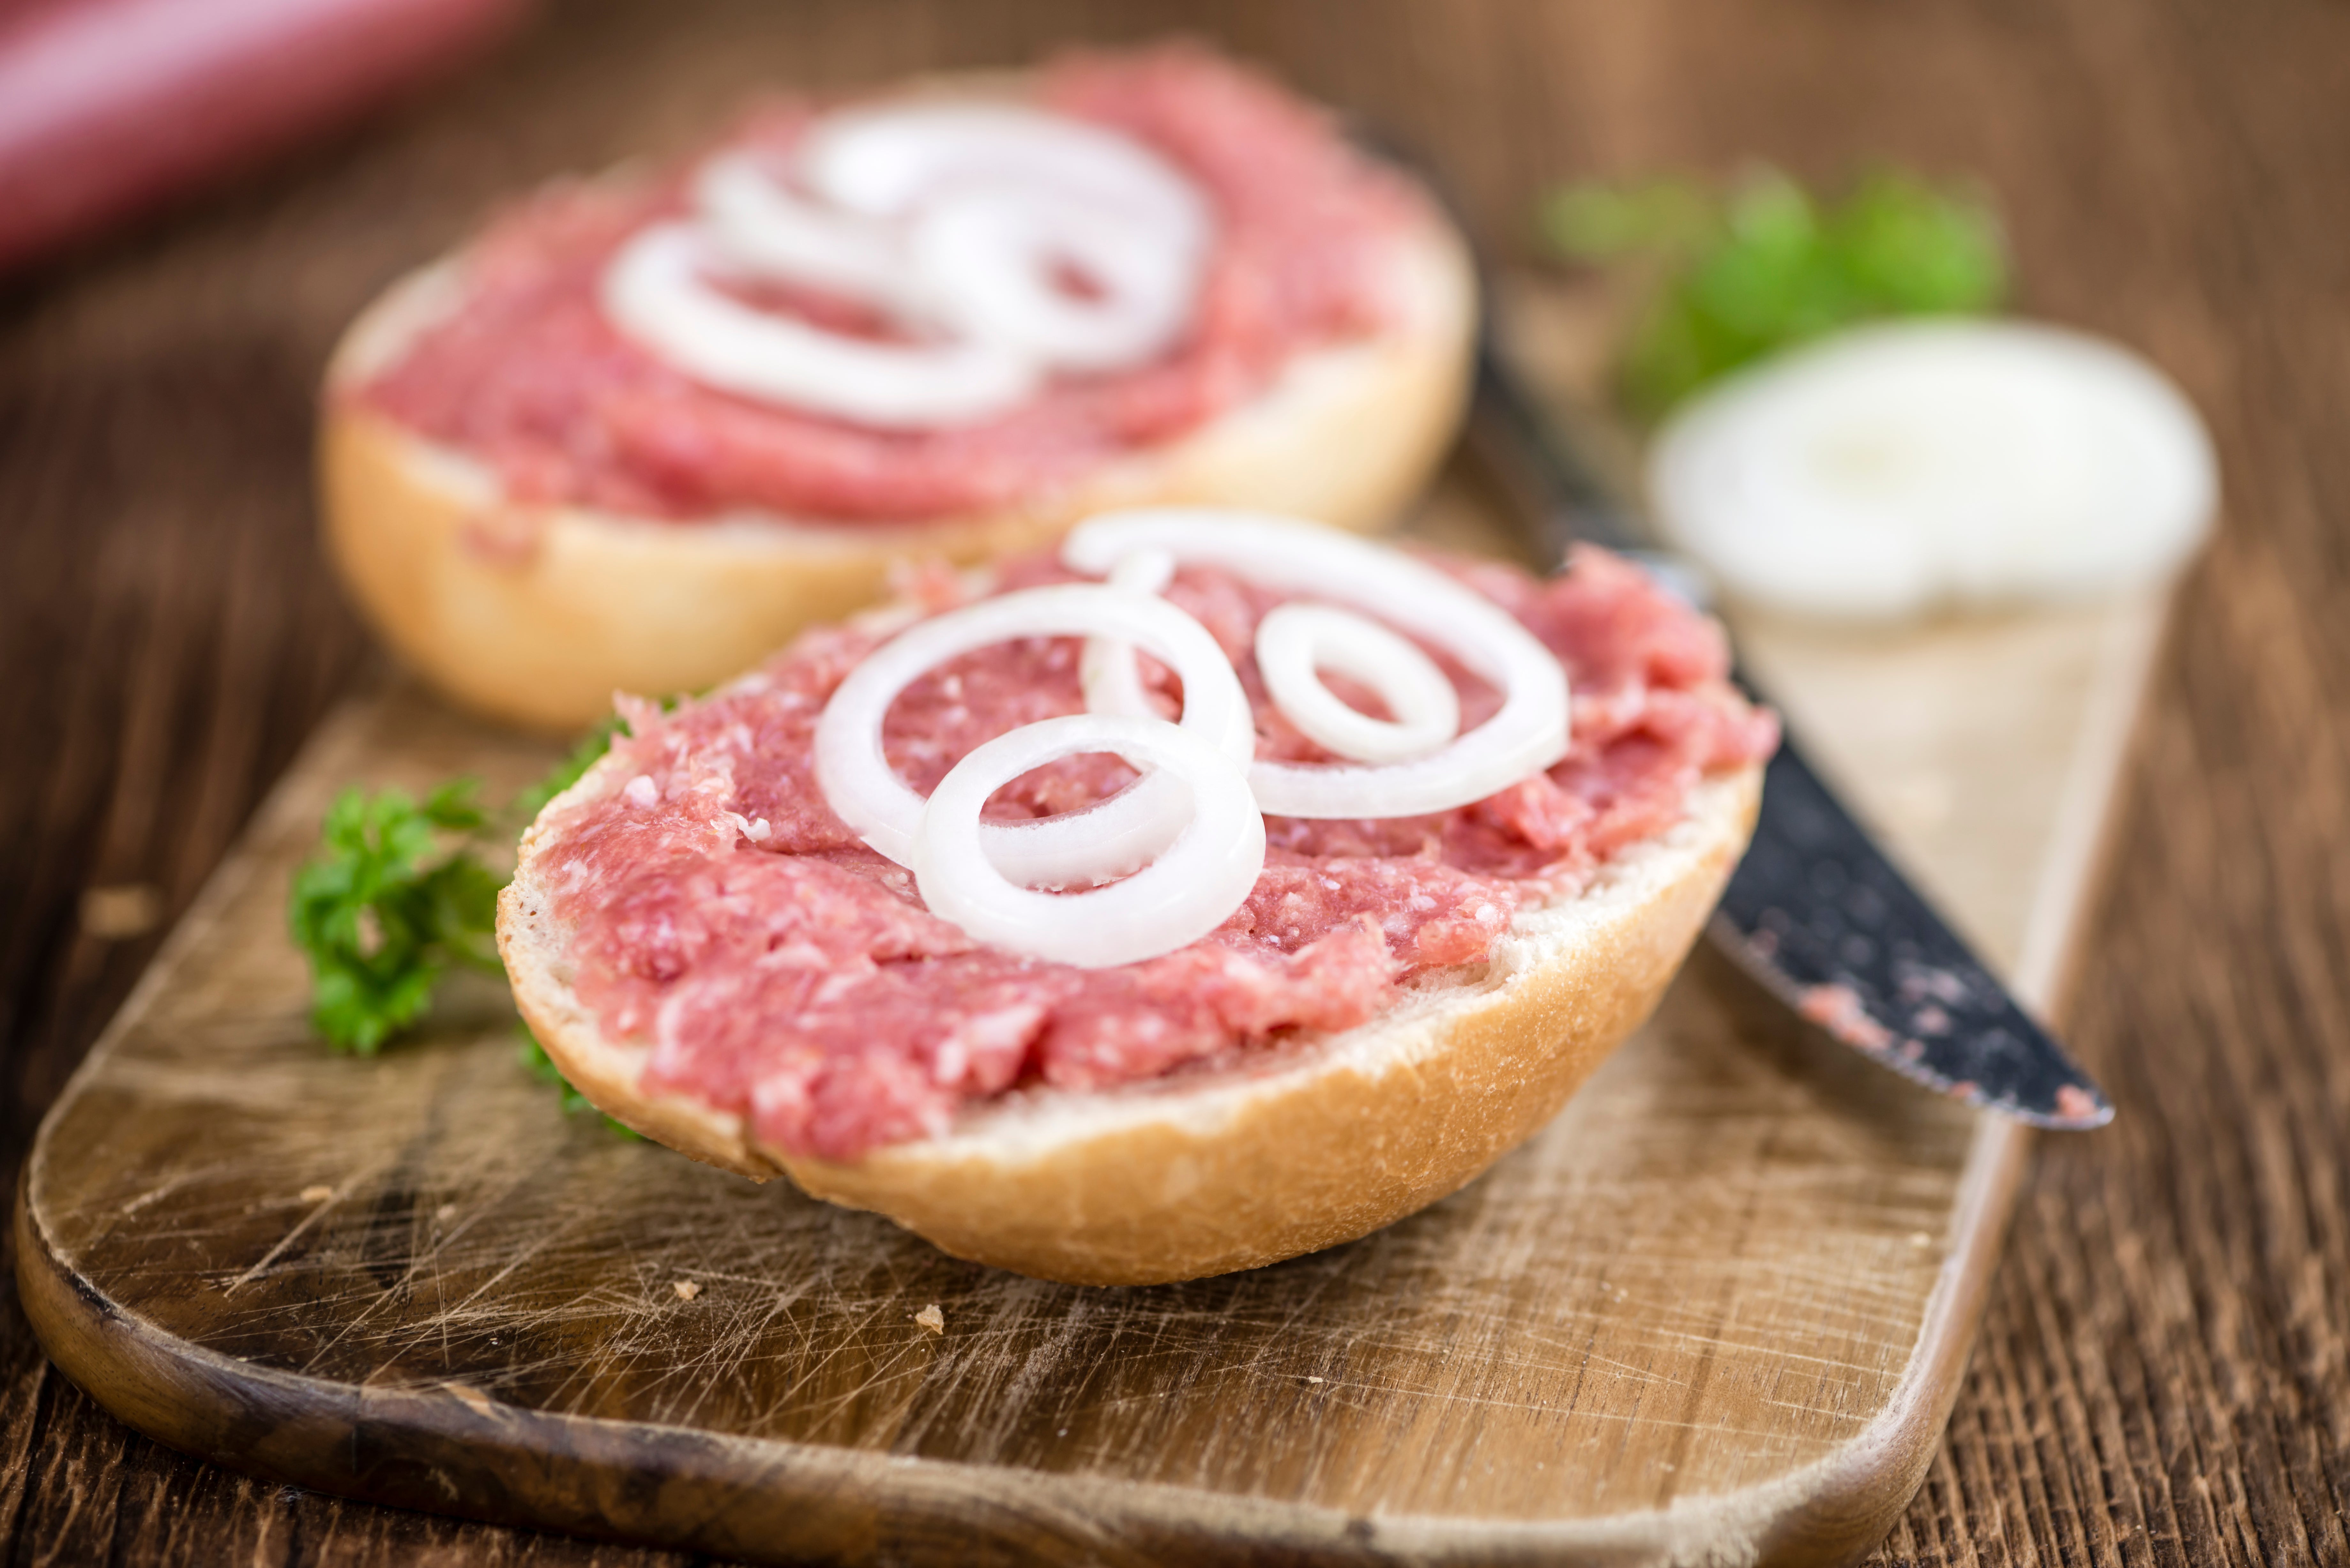 Americans warned not to eat ‘cannibal sandwiches’ filled with raw meat ...